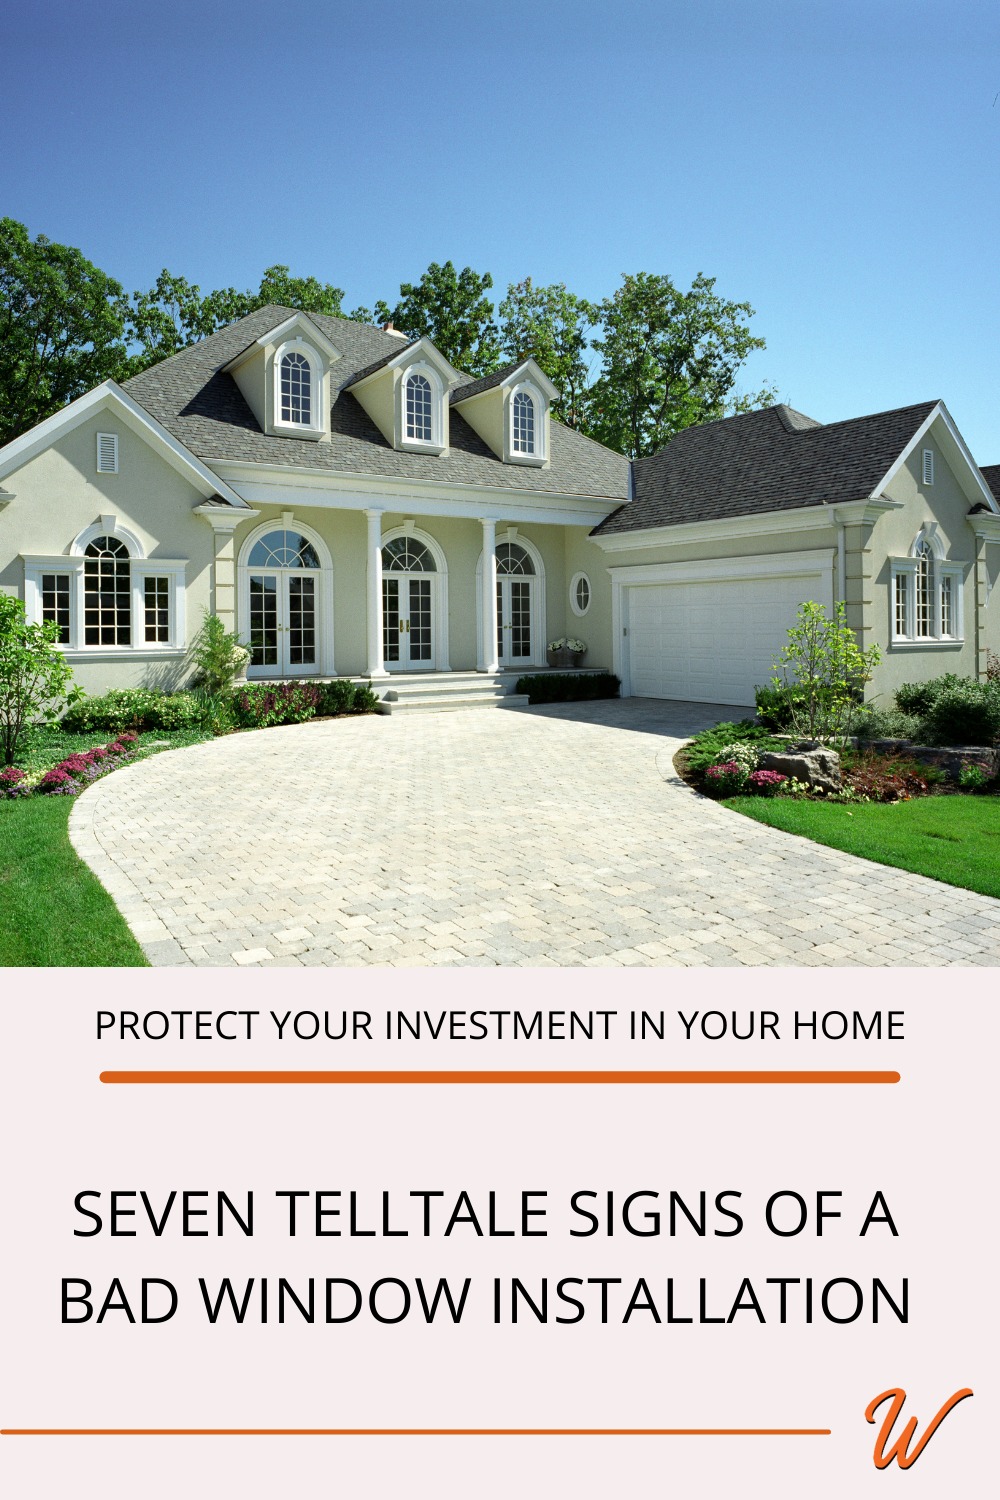 a gray stucco home with white french country windows, captioned with "protect your investment in your home: Seven telltale signs of a bad window installation"